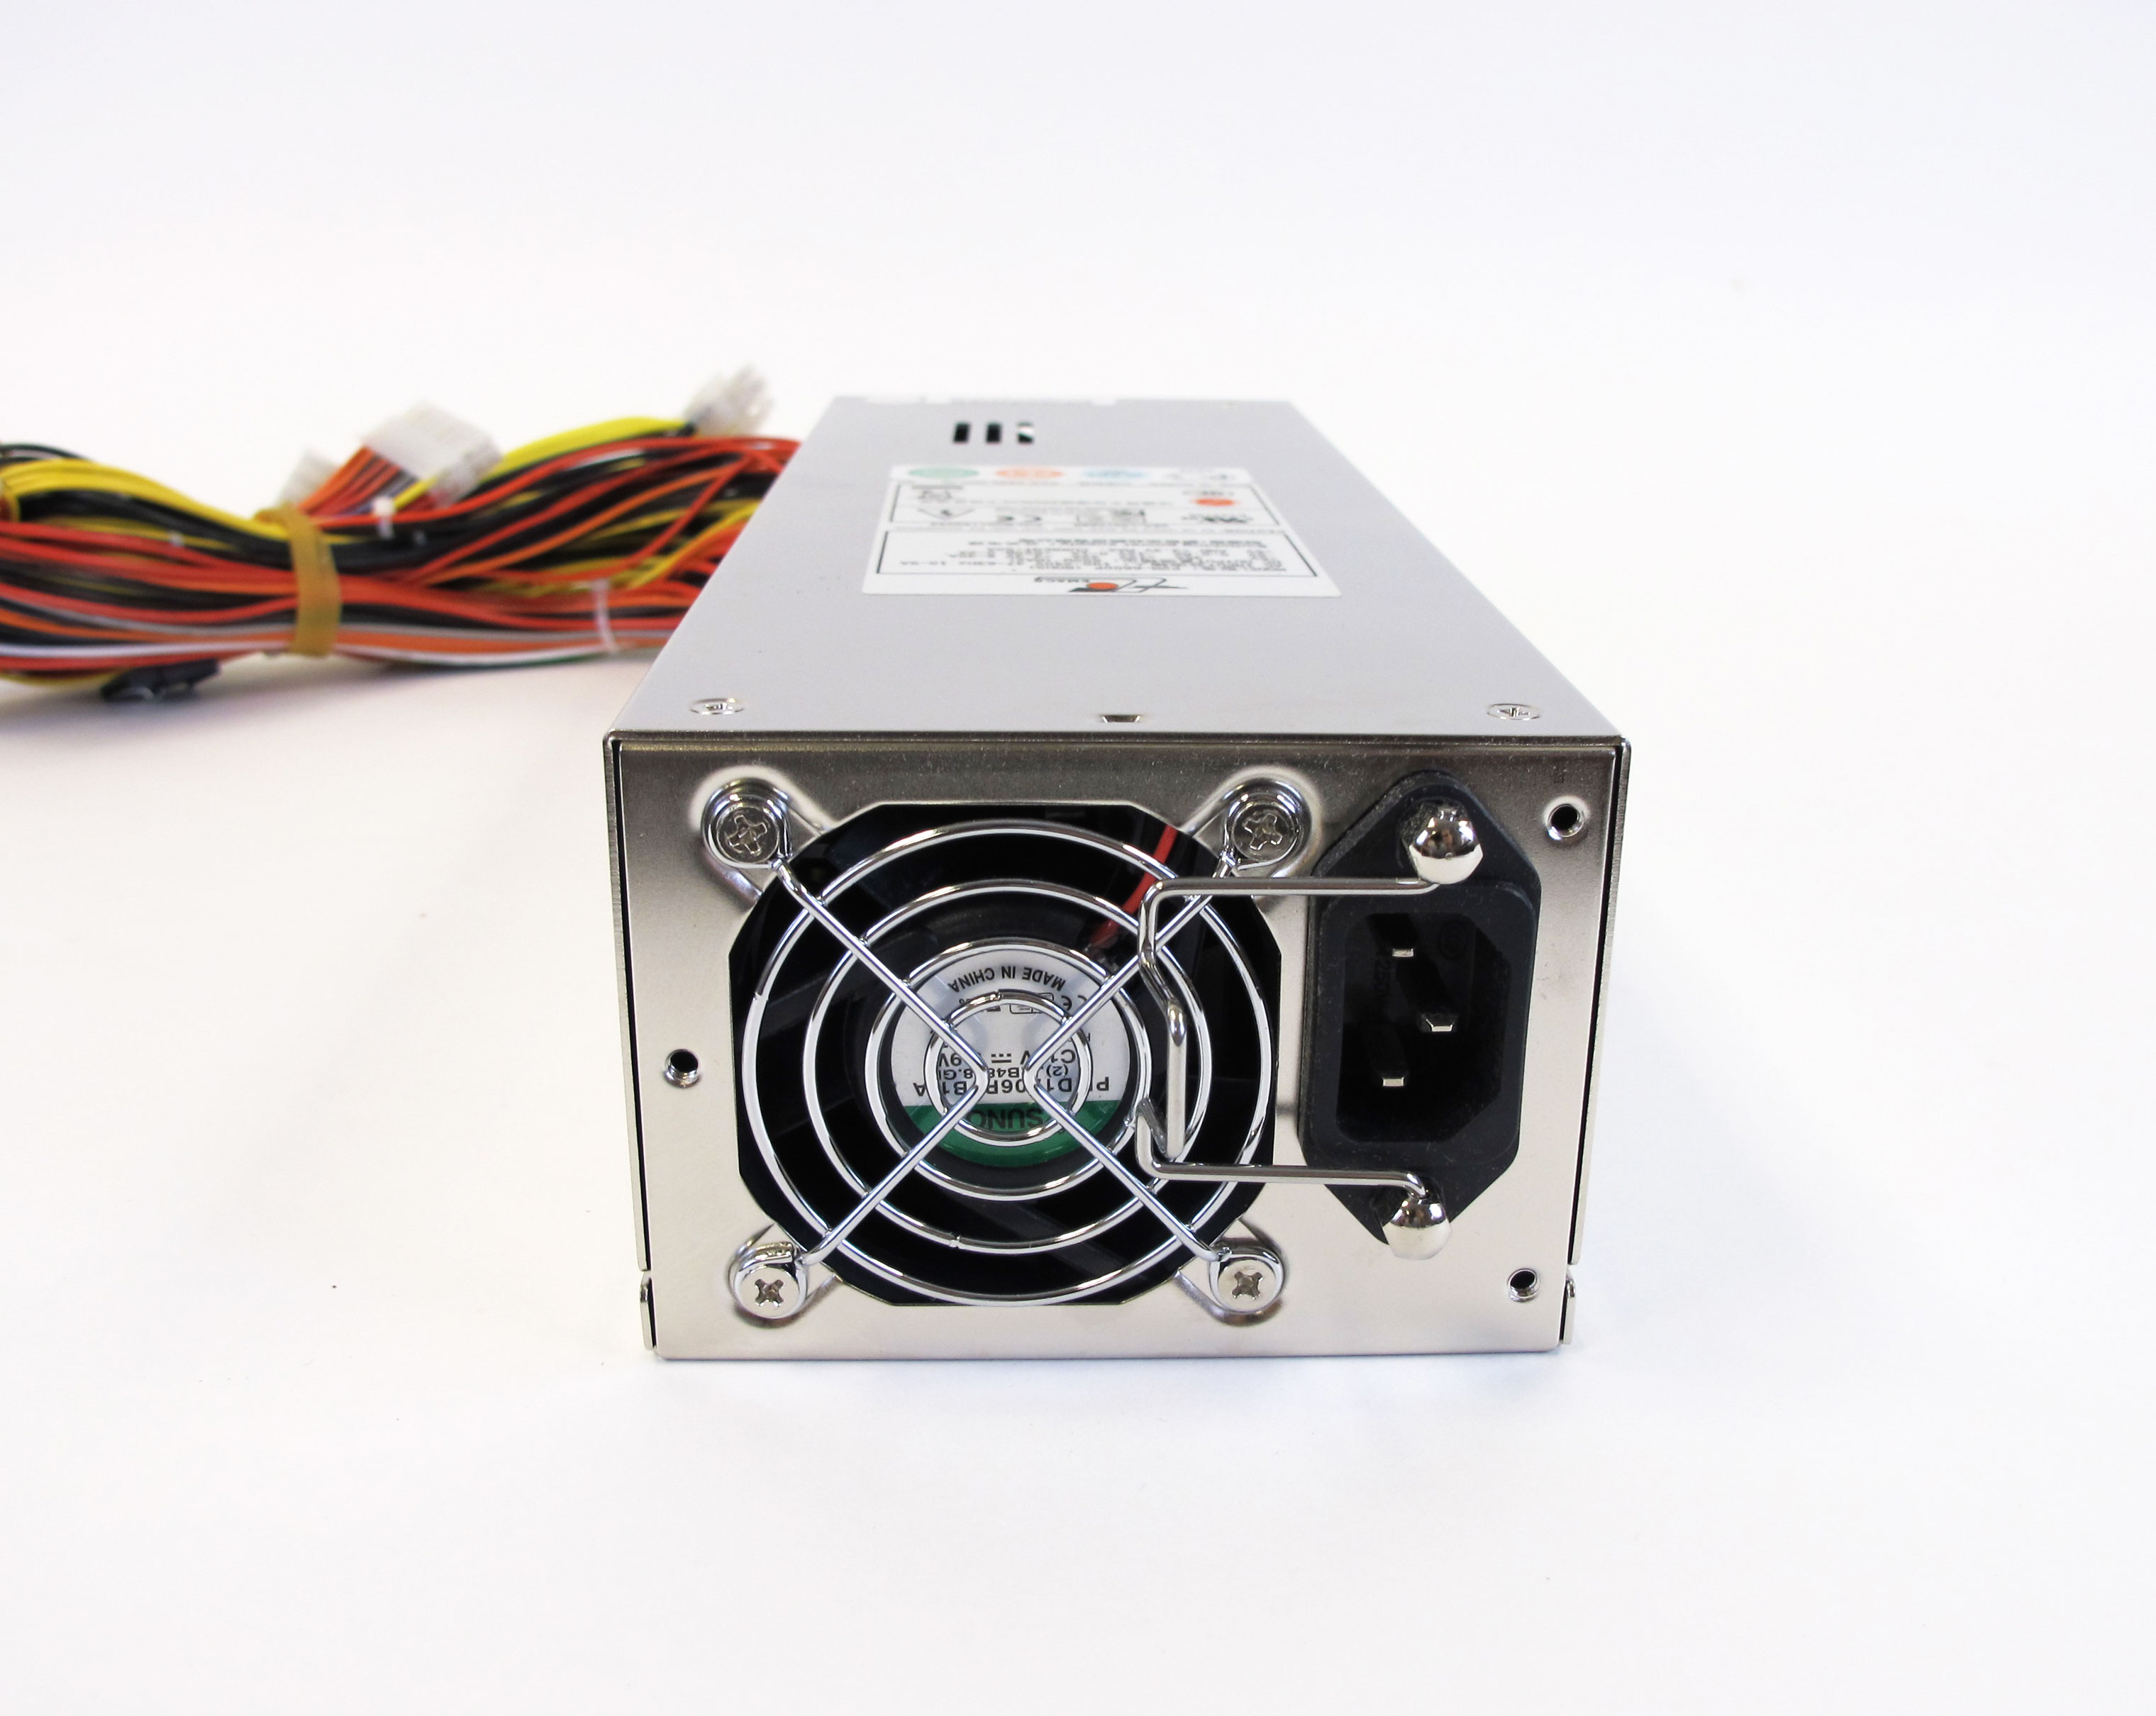 2U Industrial Power Supply Front